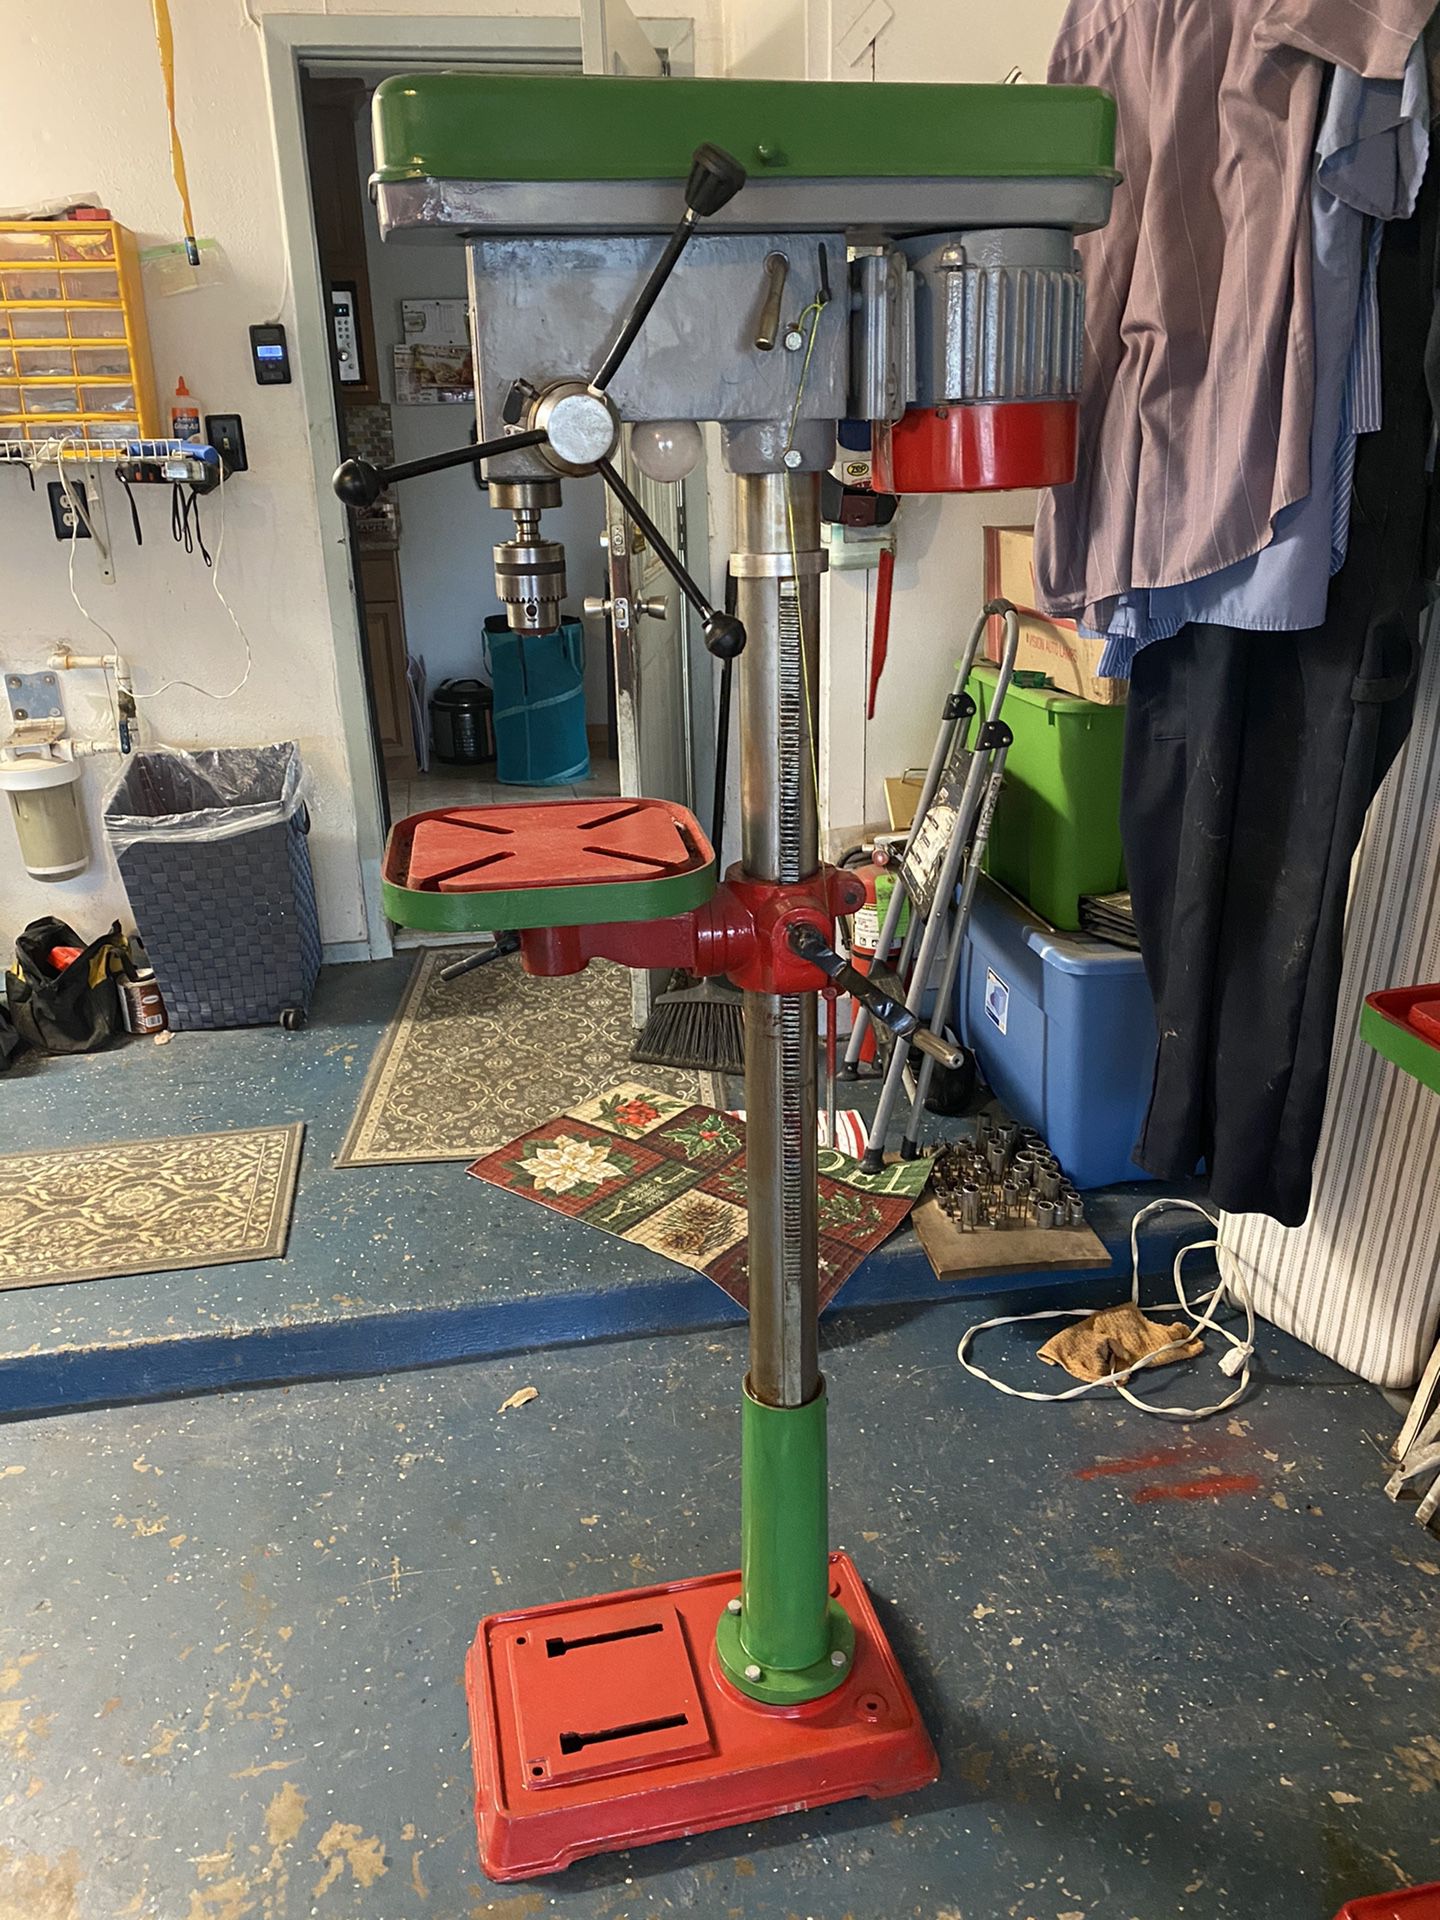 Drill Press with light - Omaha Industrial Tool. Reconditioned!